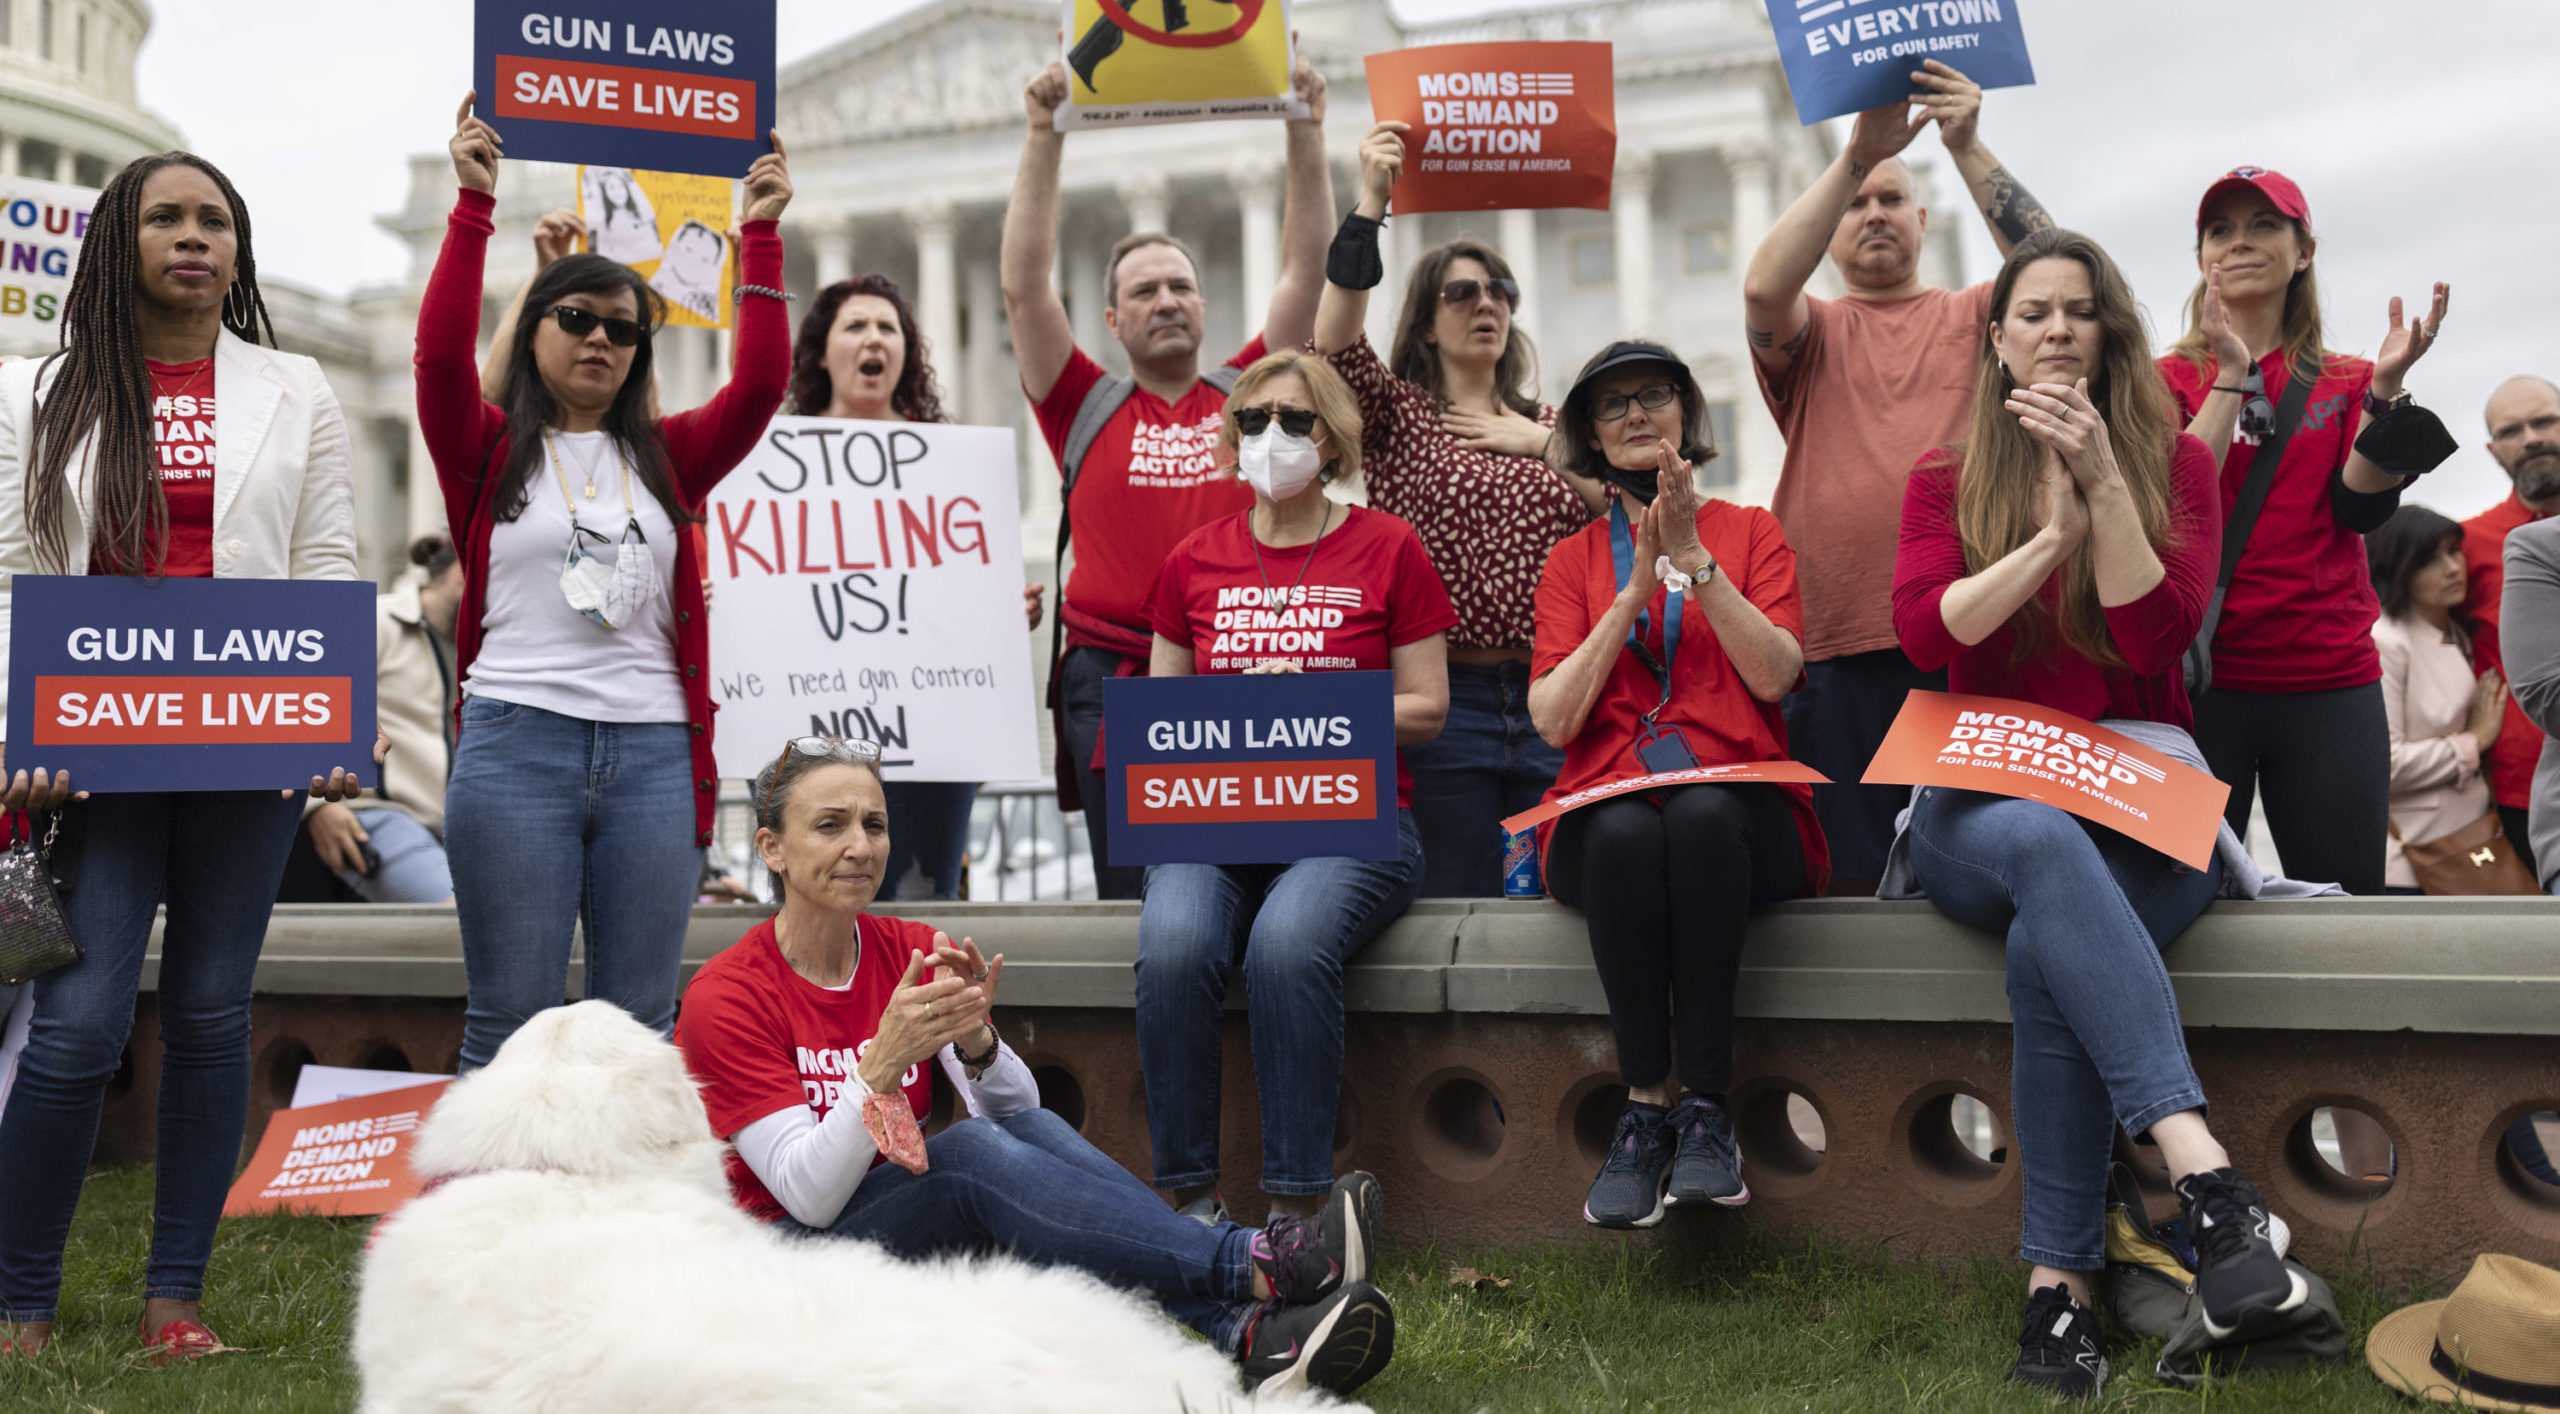 Moms Demand Action volunteers hold up "Gun Laws Save Lives" signs on Capitol Hill